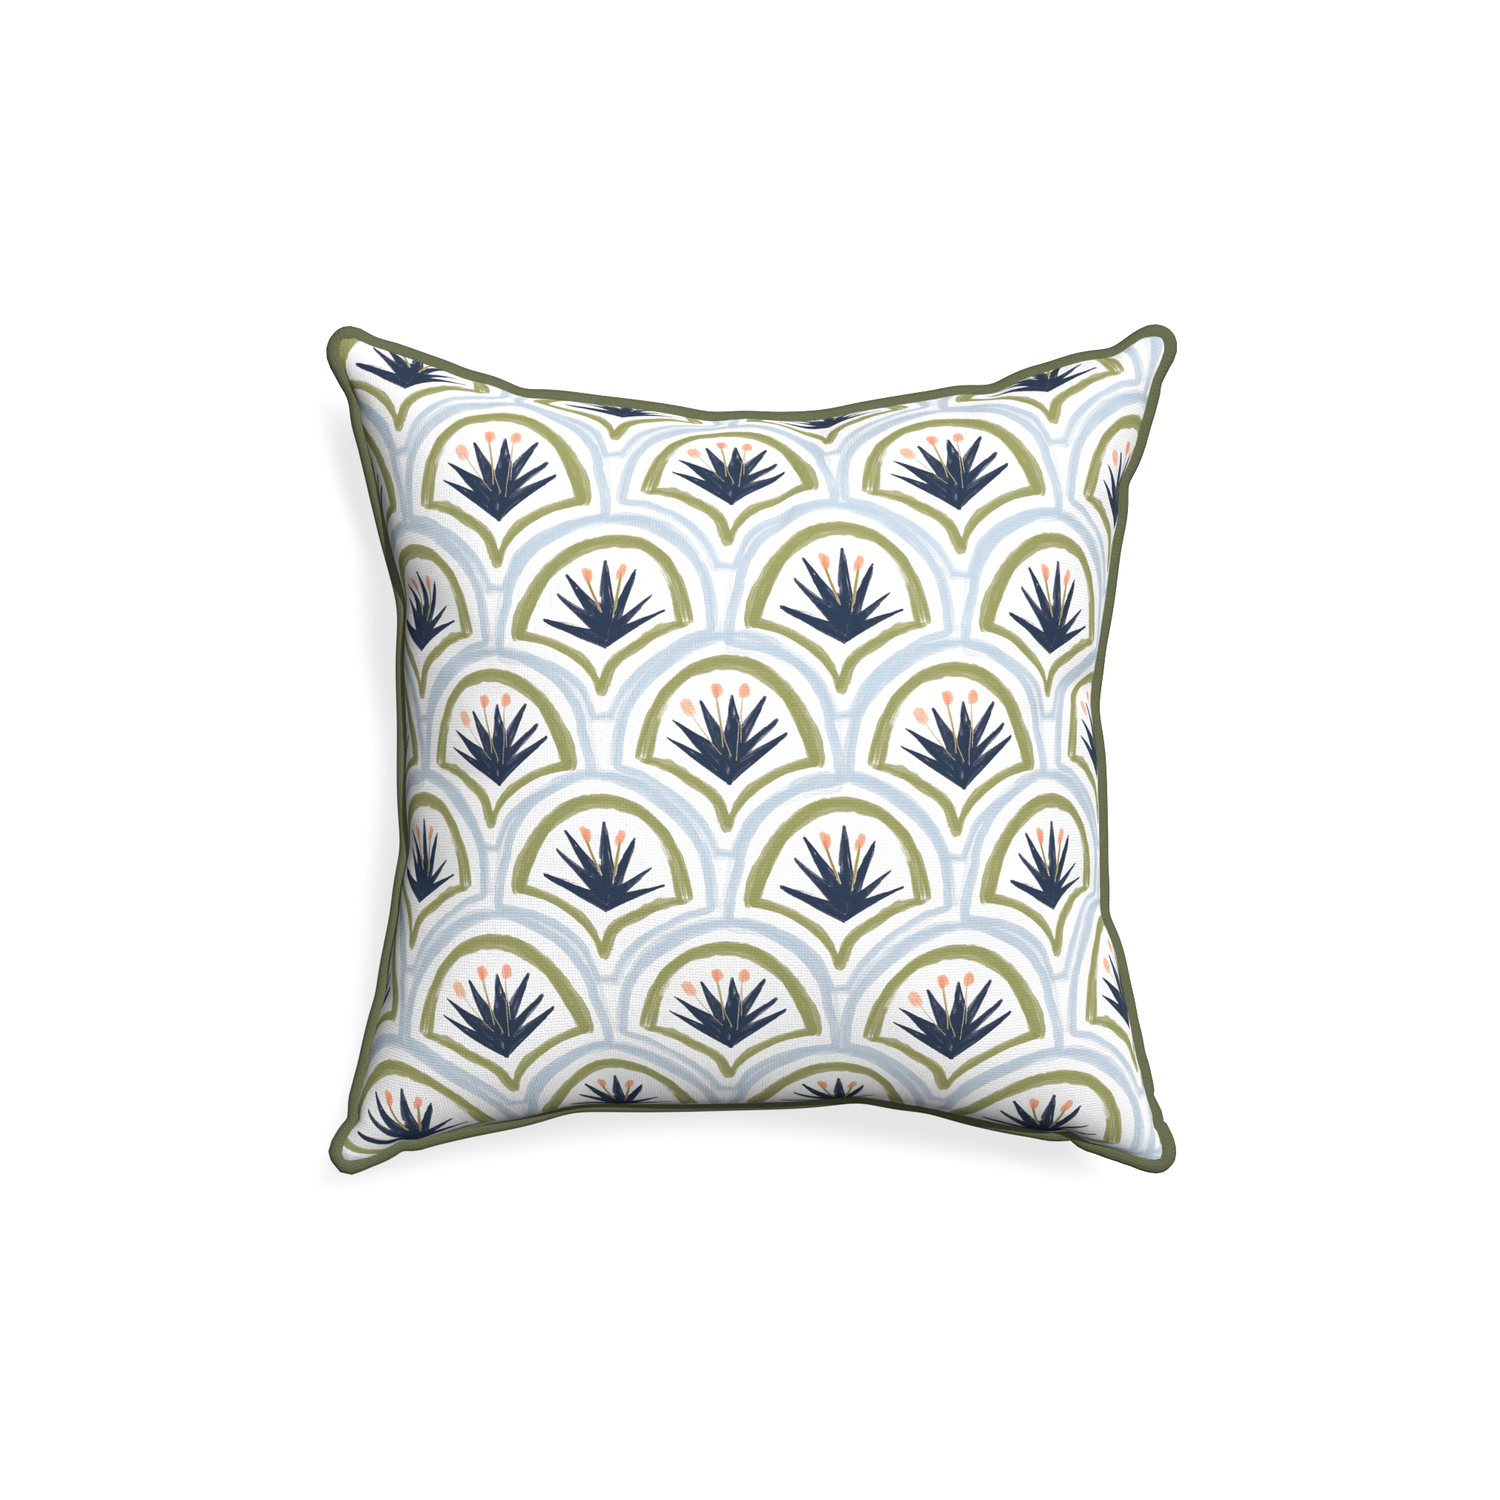 18-square thatcher midnight custom art deco palm patternpillow with f piping on white background